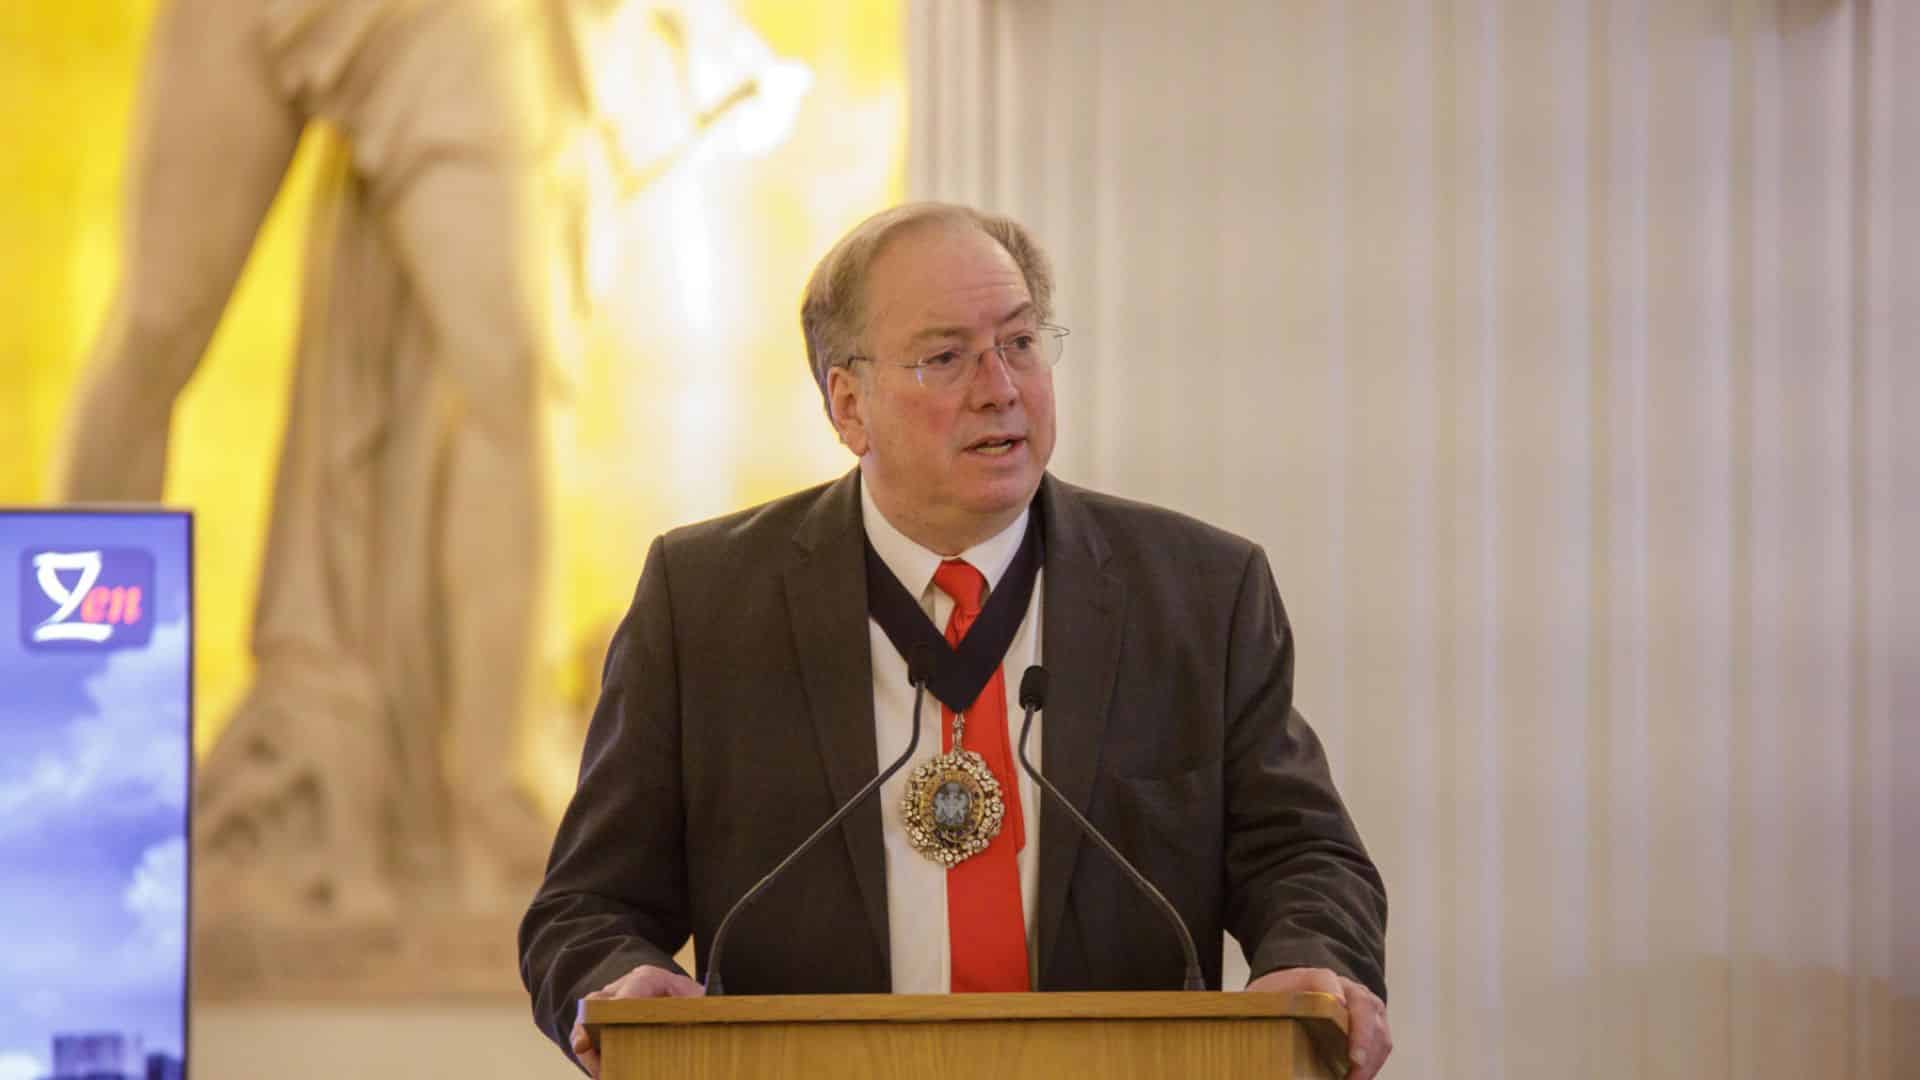 Lord Mayor Mainelli Celebrates London’s Rich History and Inclusive Discourse